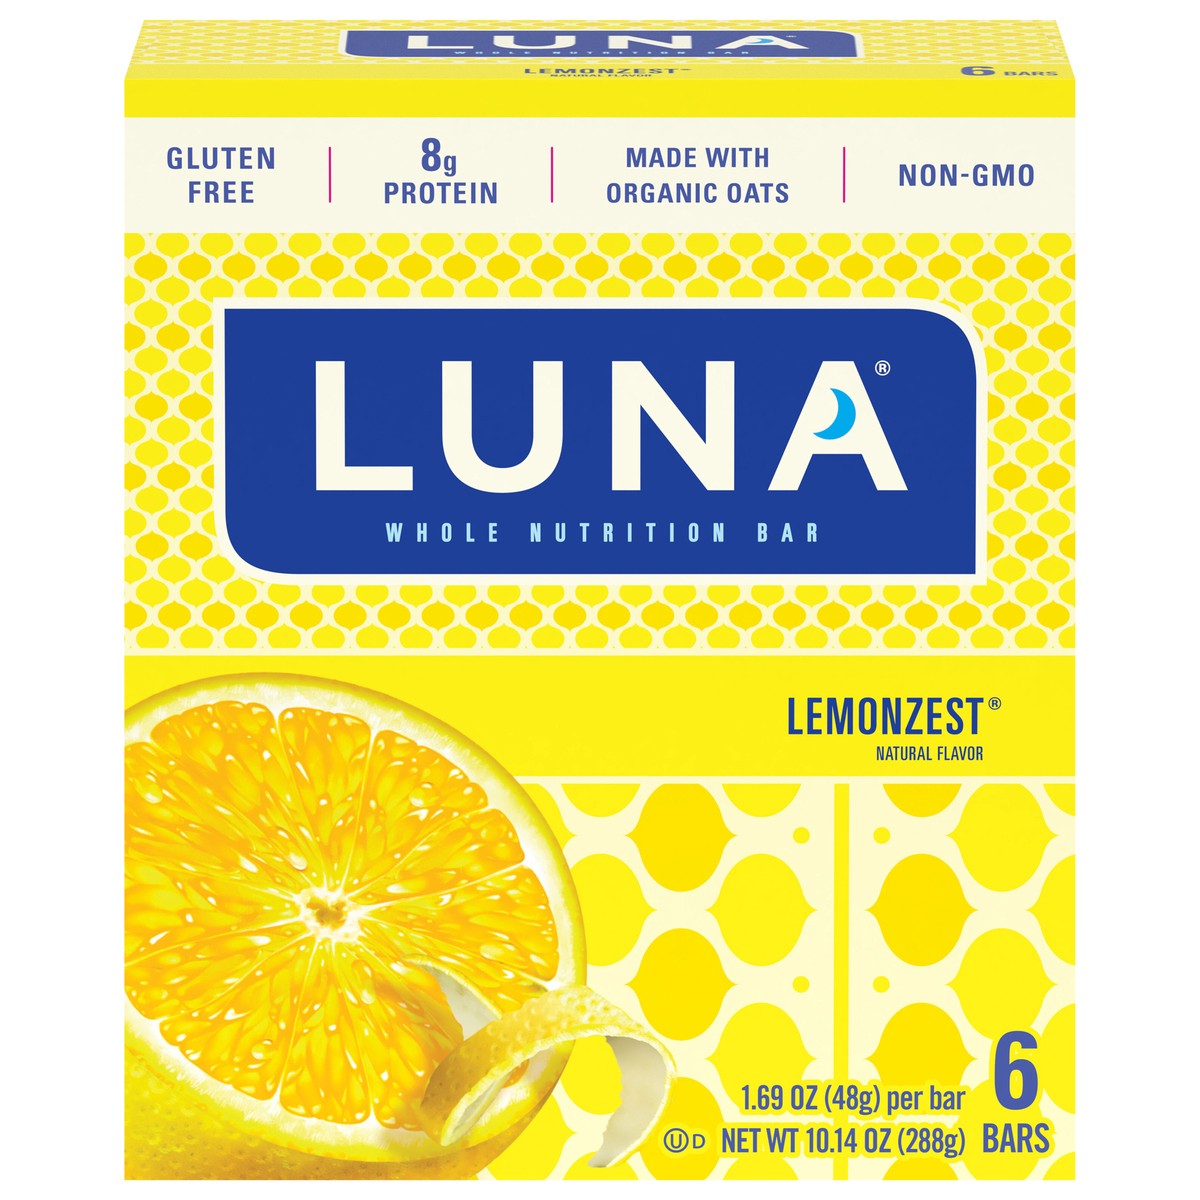 slide 1 of 7, LUNA Bar - LemonZest Flavor - Gluten-Free - Non-GMO - 7-9g Protein - Made with Organic Oats - Low Glycemic - Whole Nutrition Snack Bars - 1.69 oz. (6 Pack), 6 ct; 1.69 oz